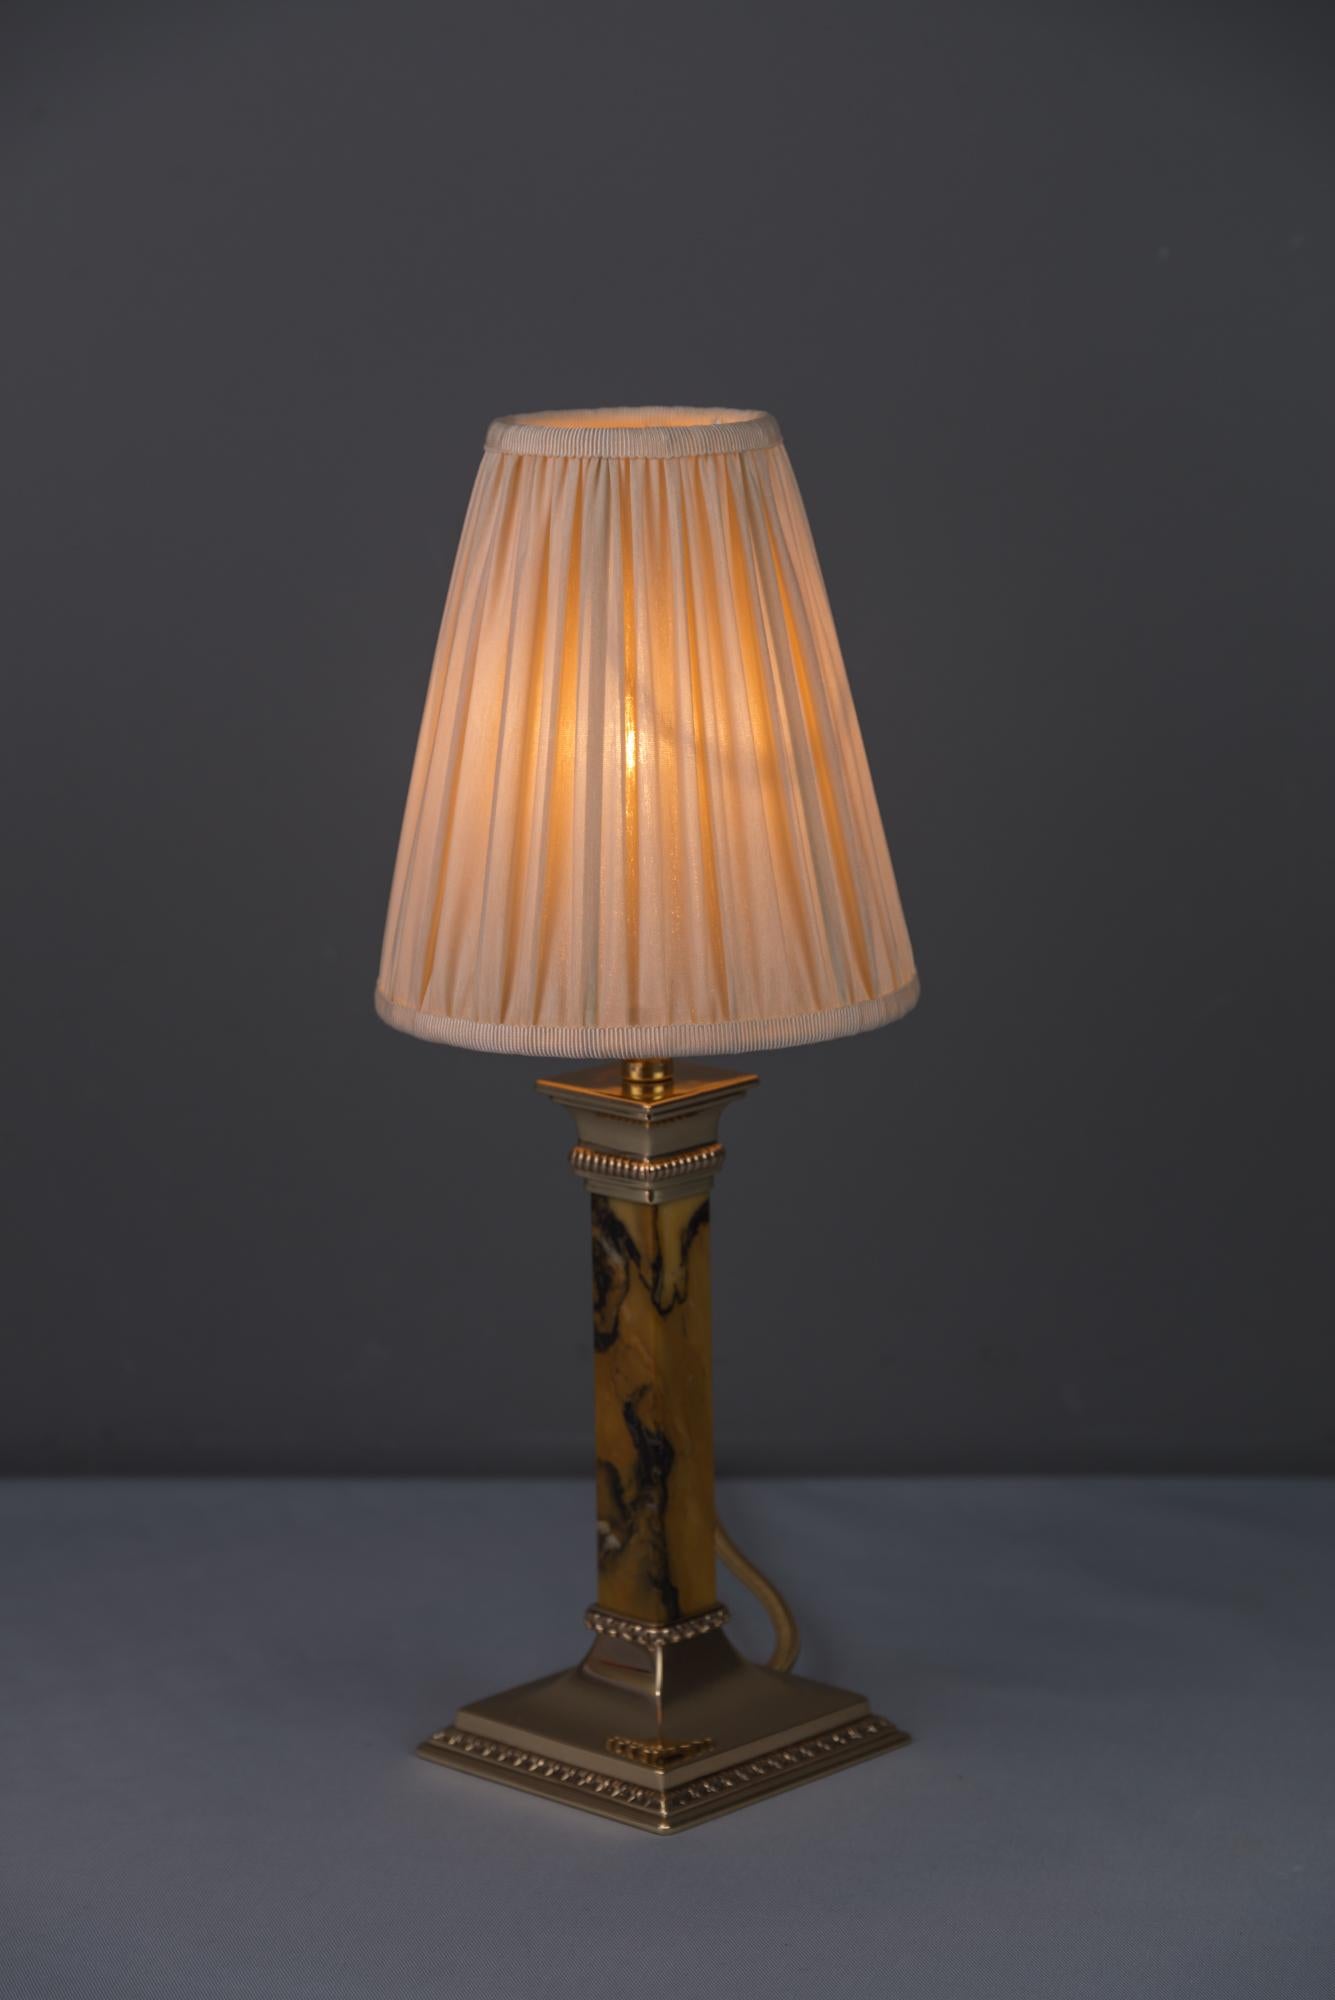 Early 20th Century Bronze and Marble Art Deco Table Lamp with Fabric Shade, circa 1920s